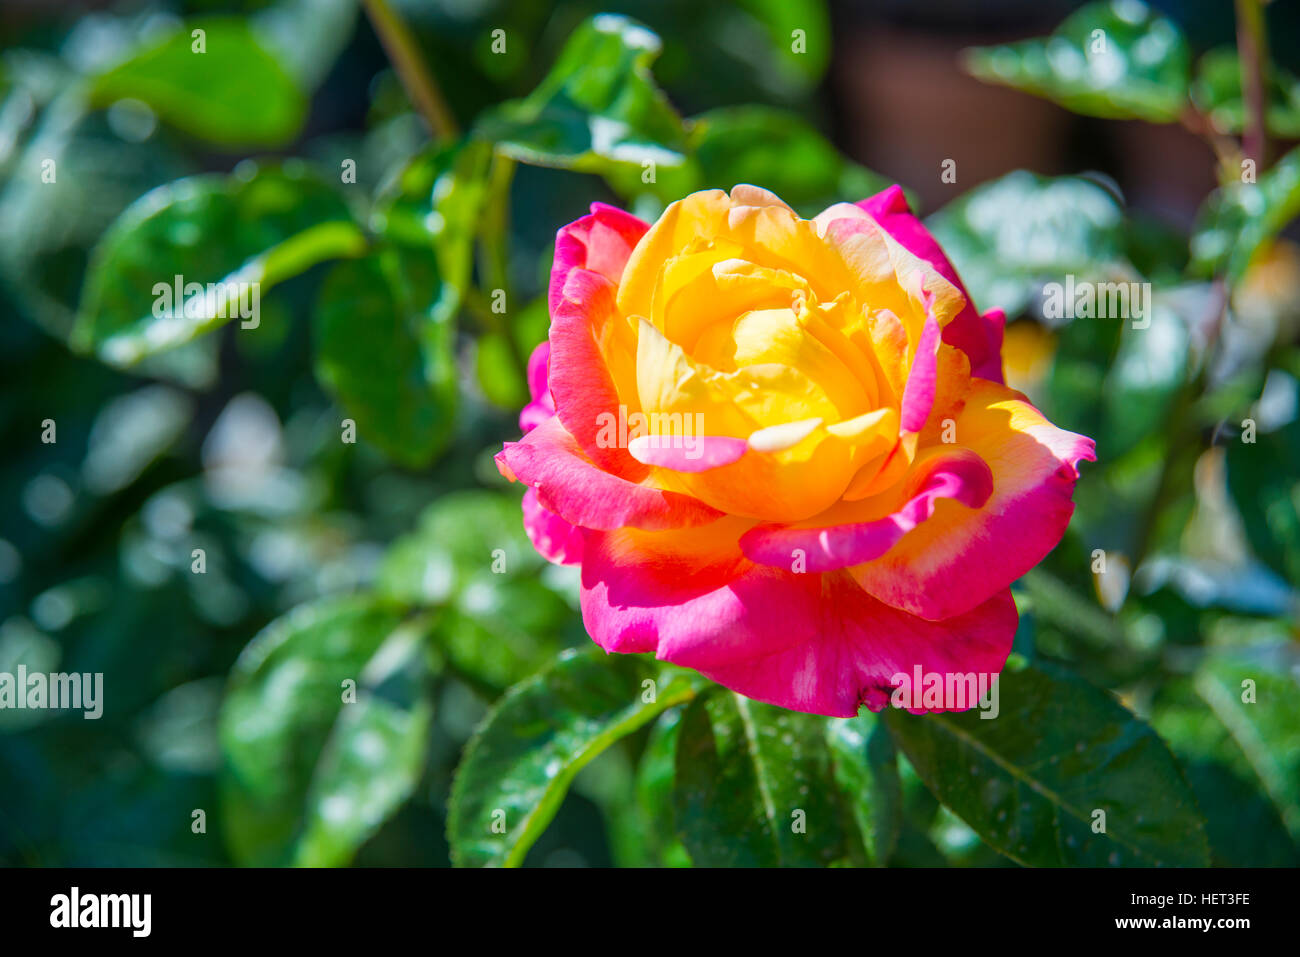 Pink and yellow rose. Close view. Stock Photo